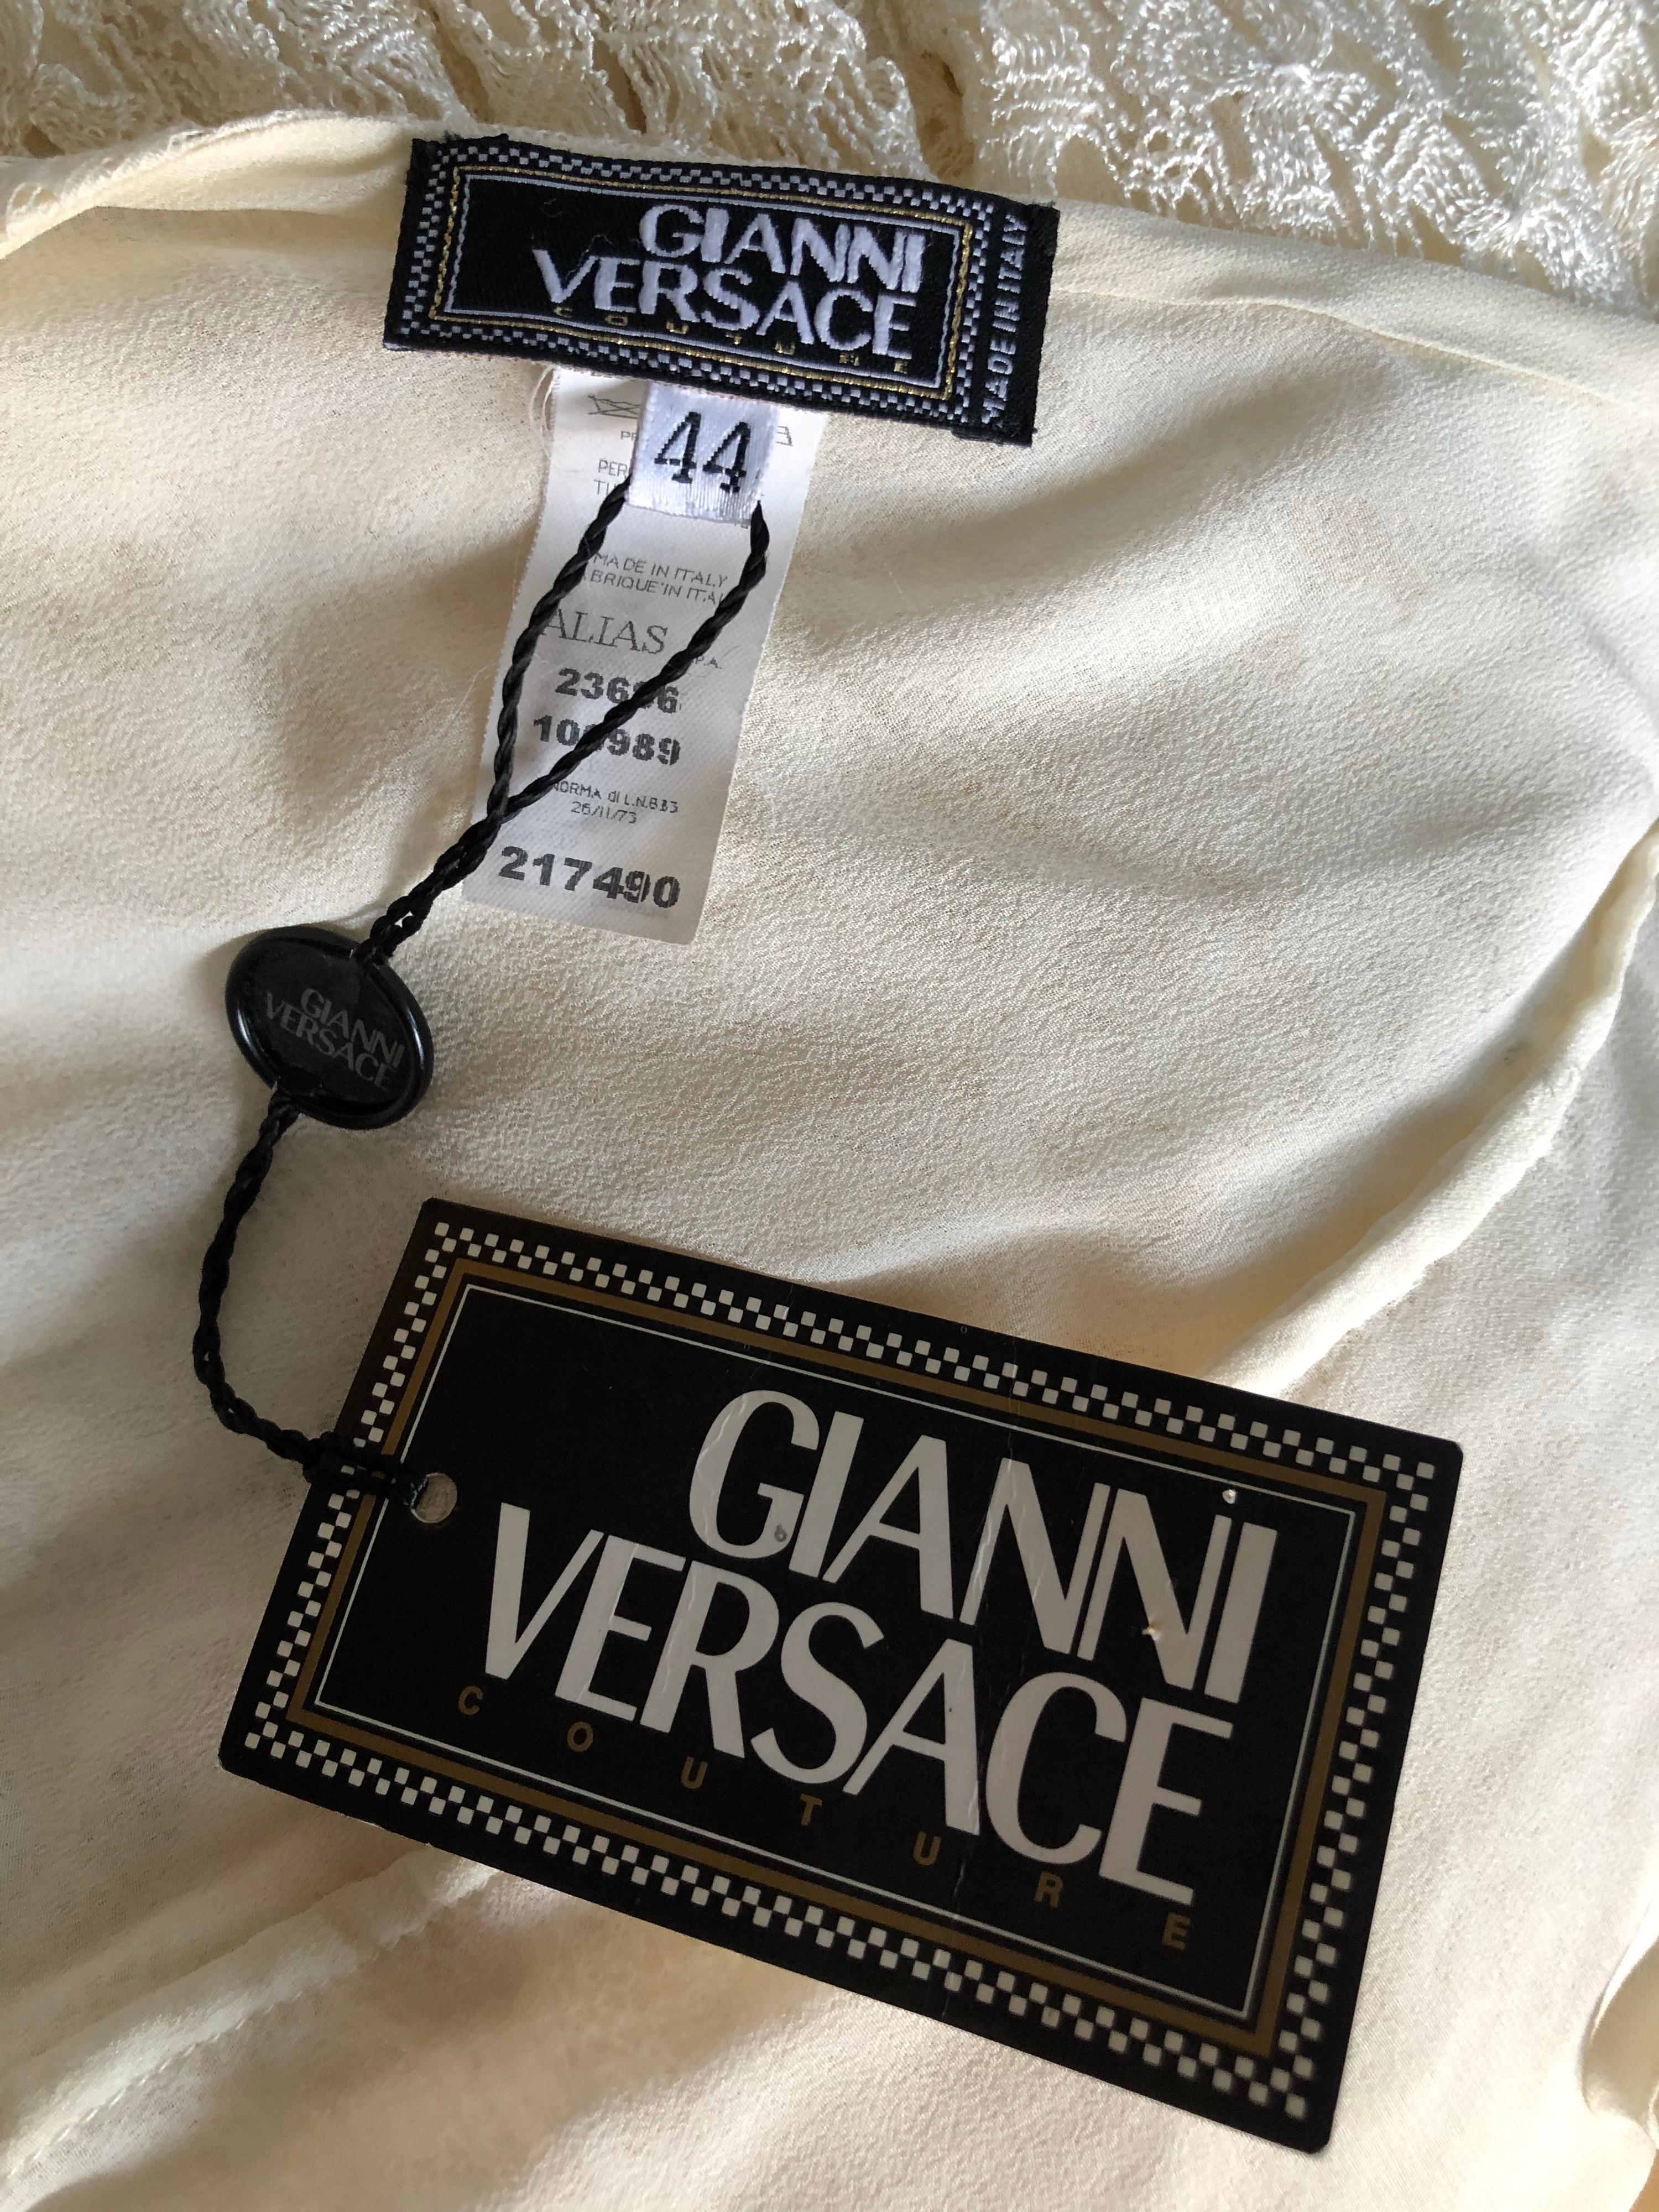 NWT Gianni Versace S/S 2002 Plunging Backless Semi Sheer Lace Ivory Dress Gown 2